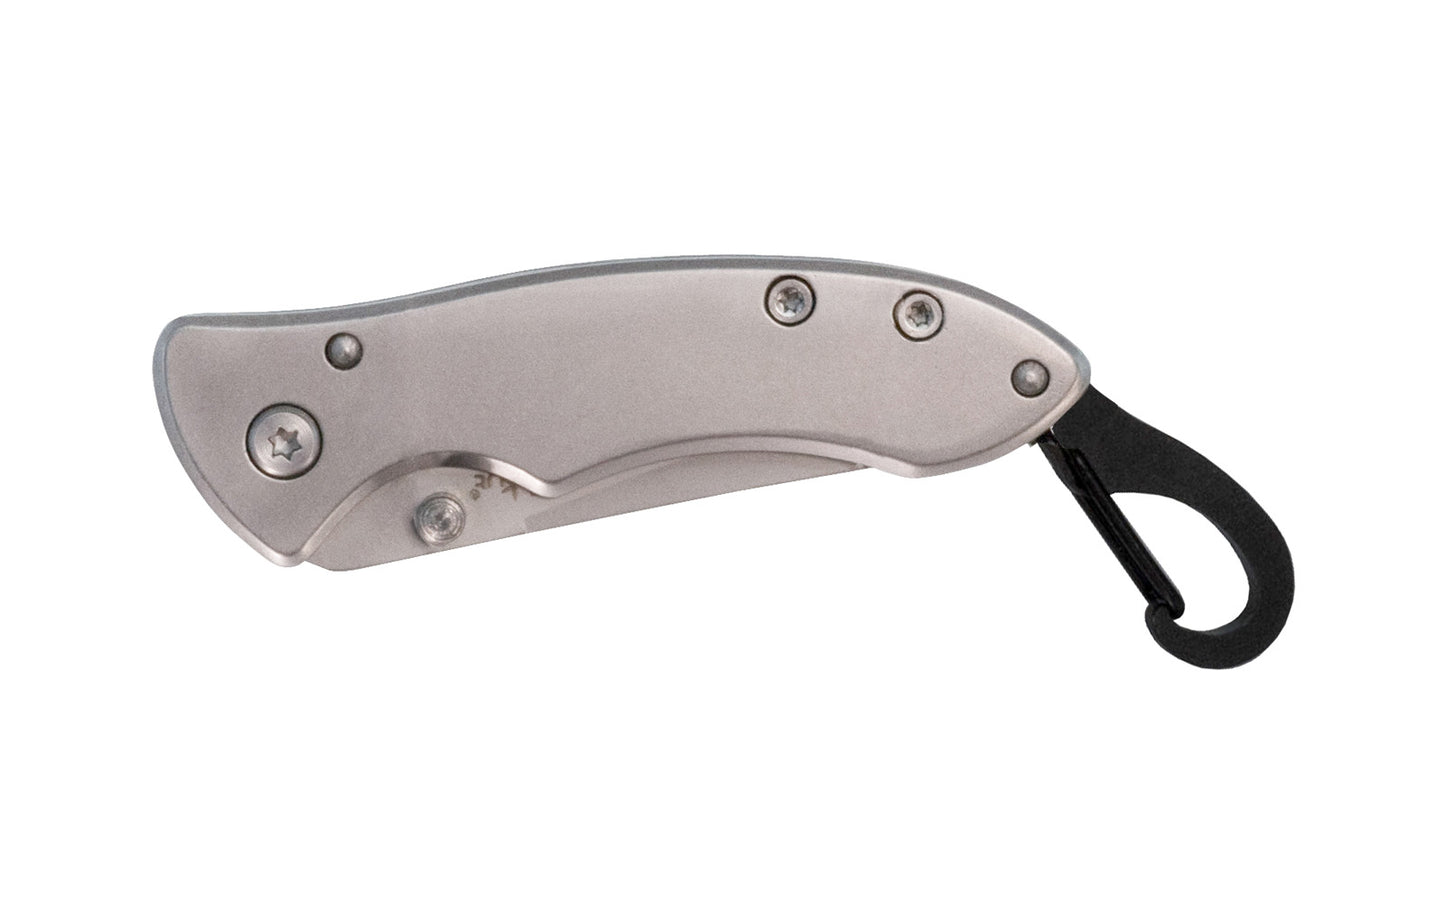 Tekut "Buddy" Stainless Folding Pocket Knife with keychain attachment clip.